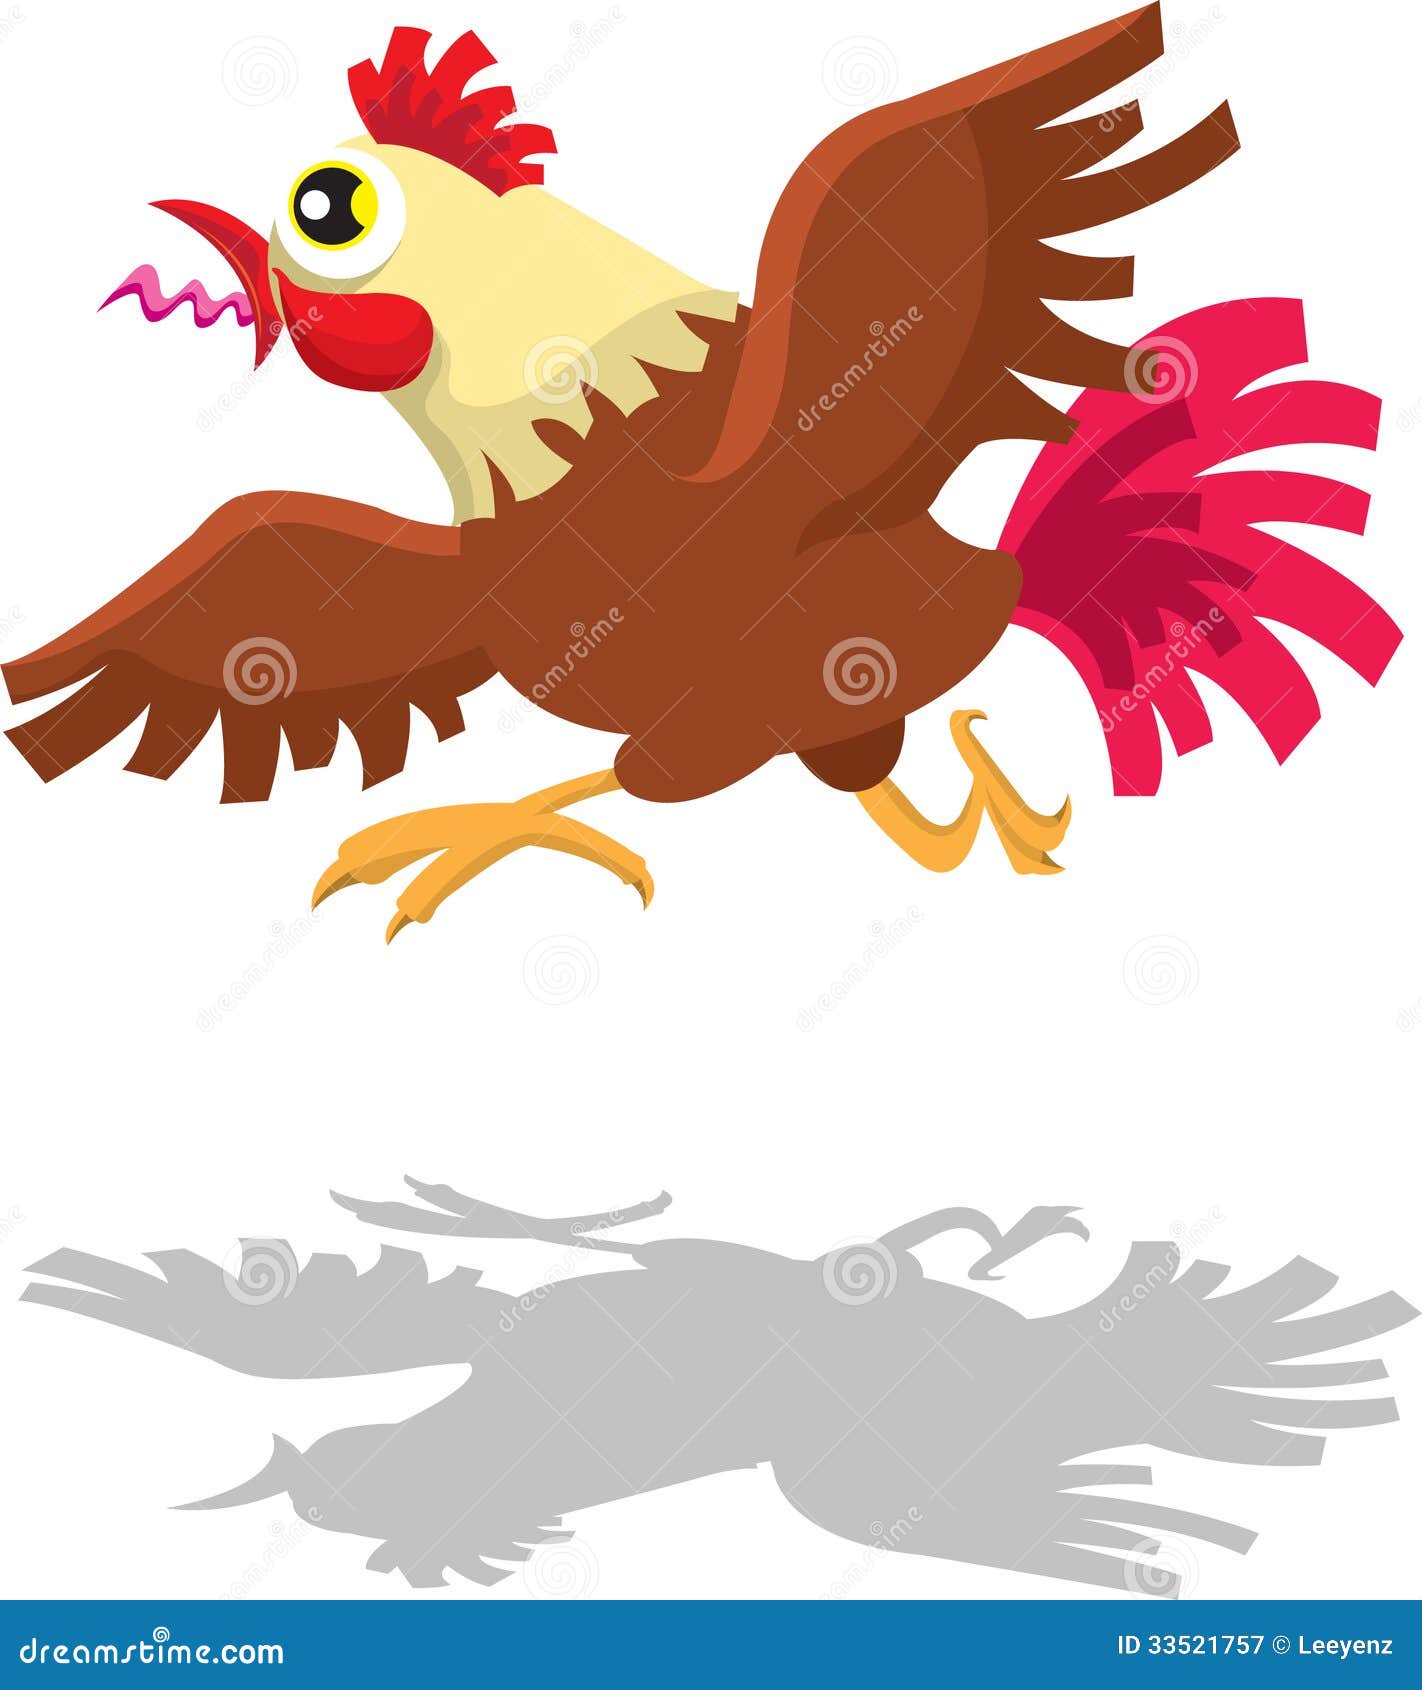 clipart rooster crowing - photo #26